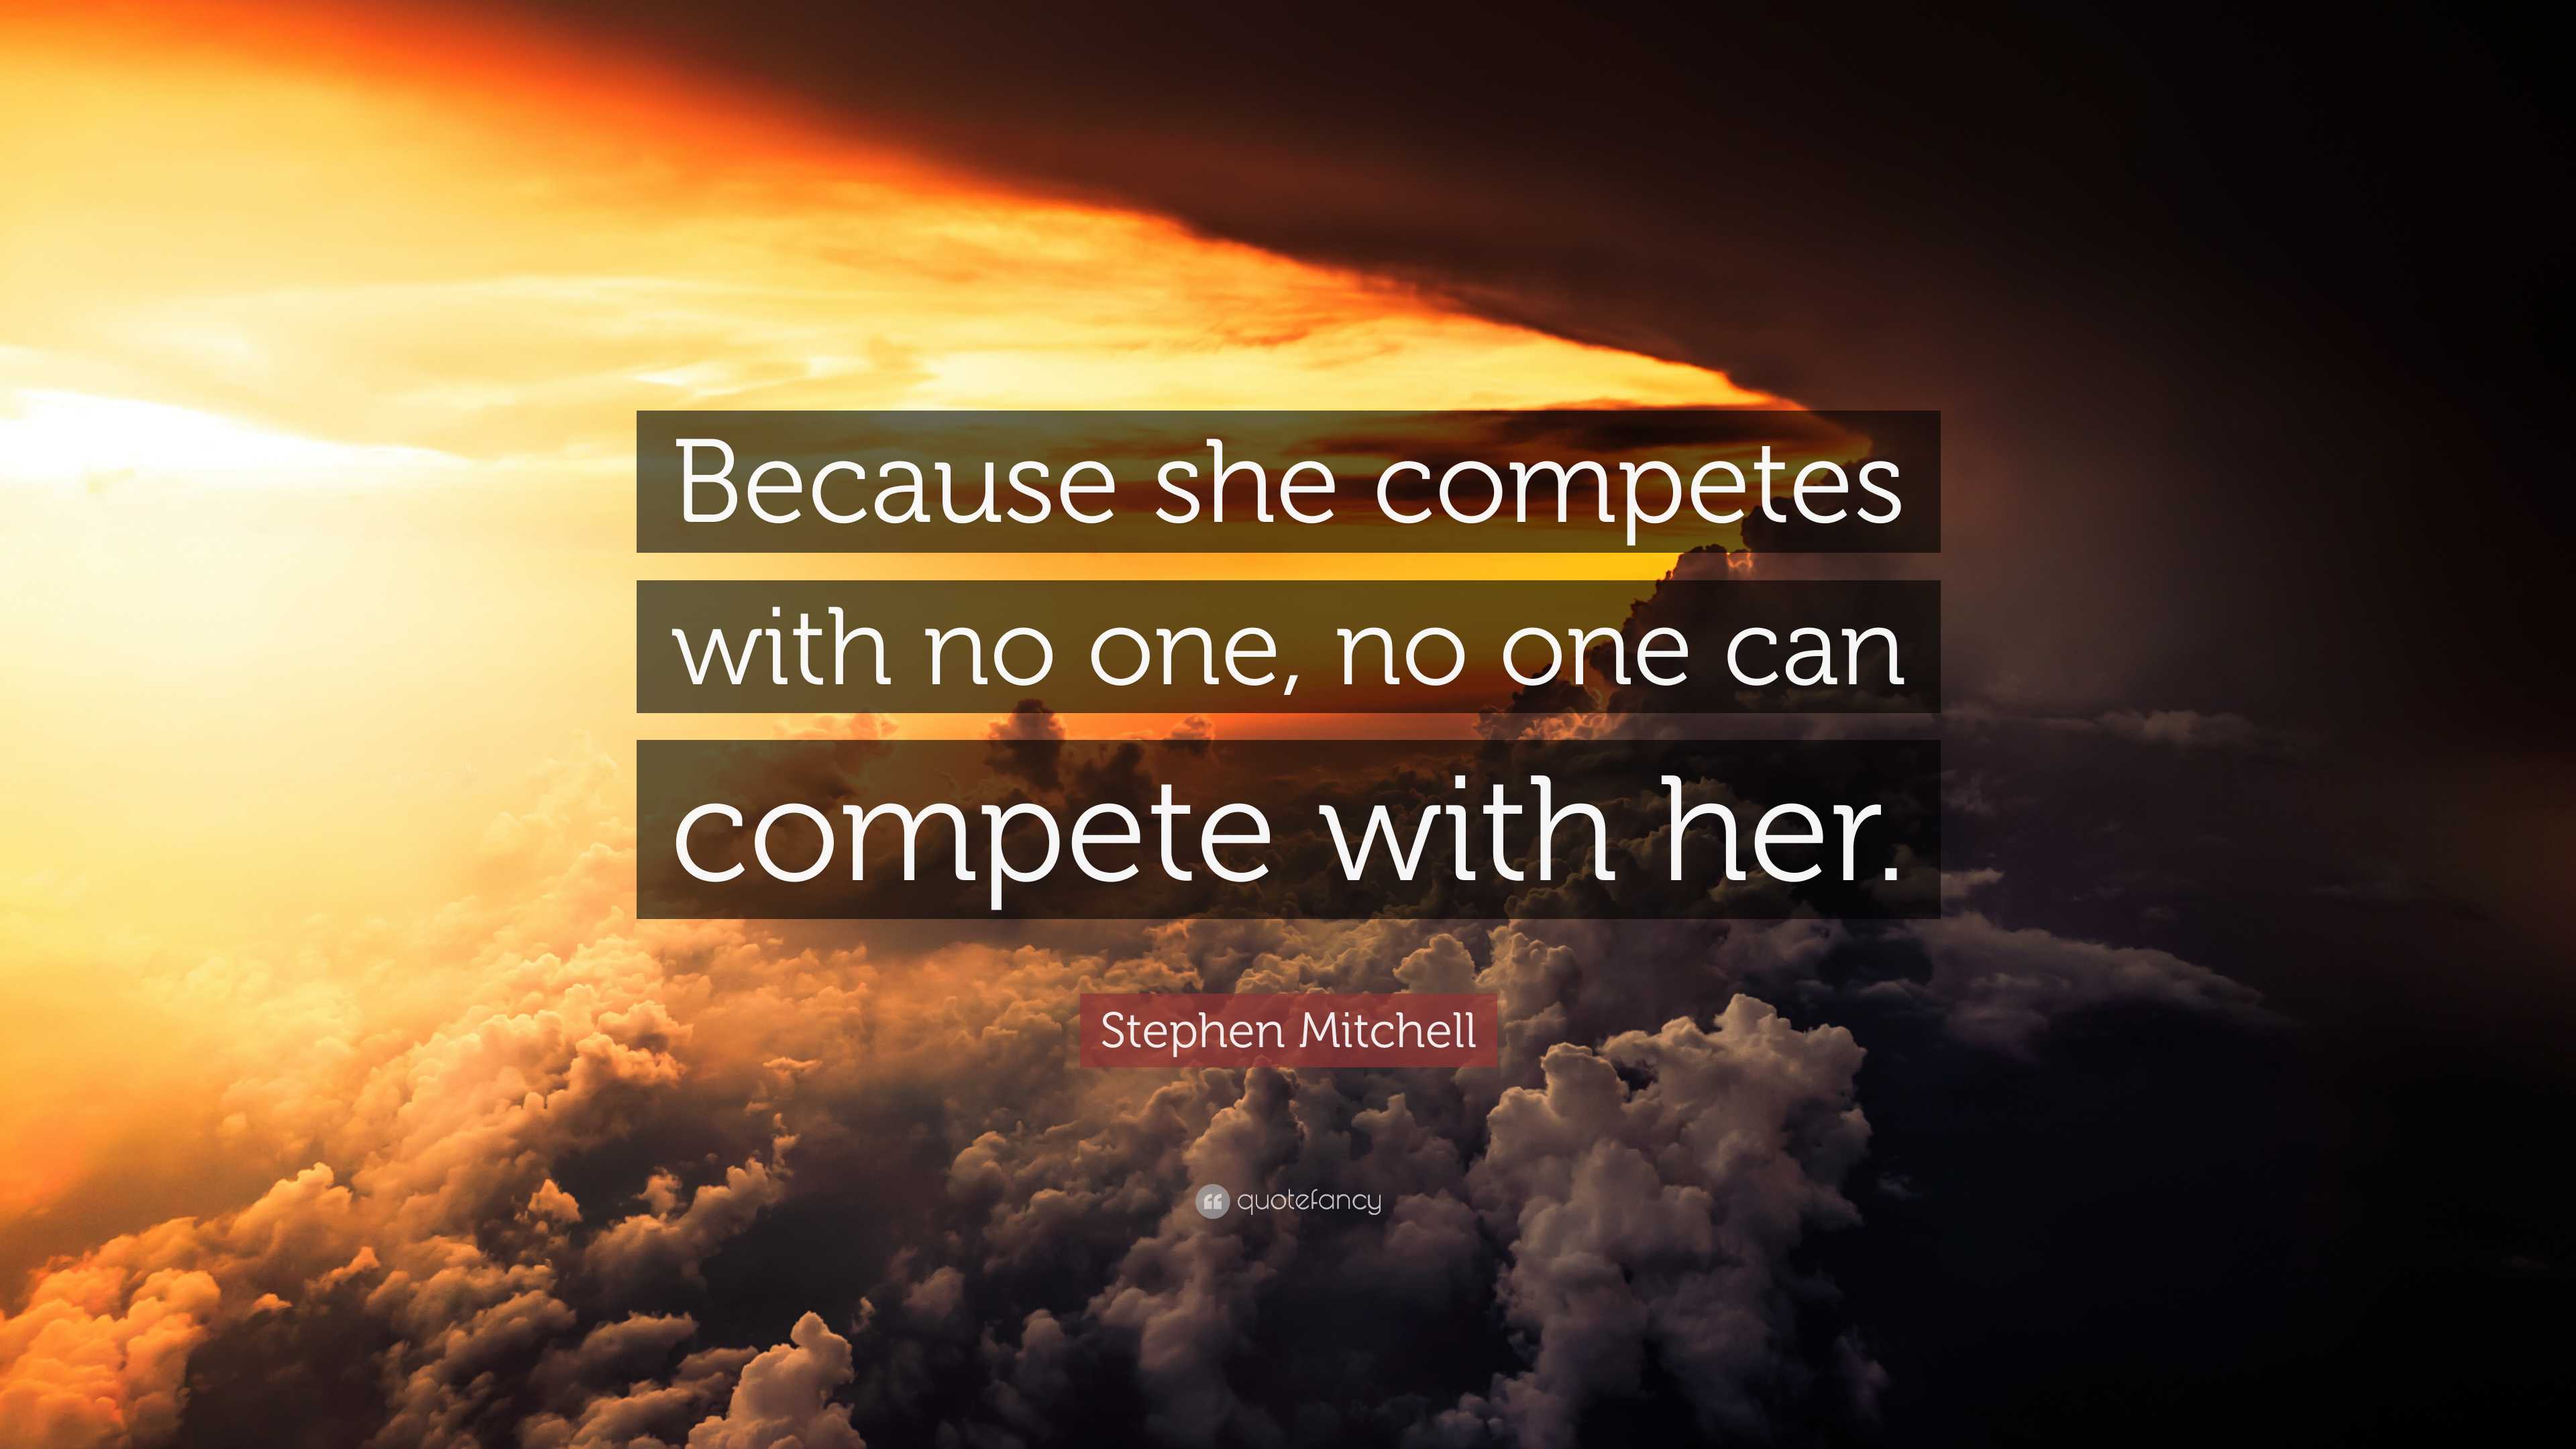 Because she competes with no one, no one can compete with her women  empowerment quotes - Women Empowerment - Pin